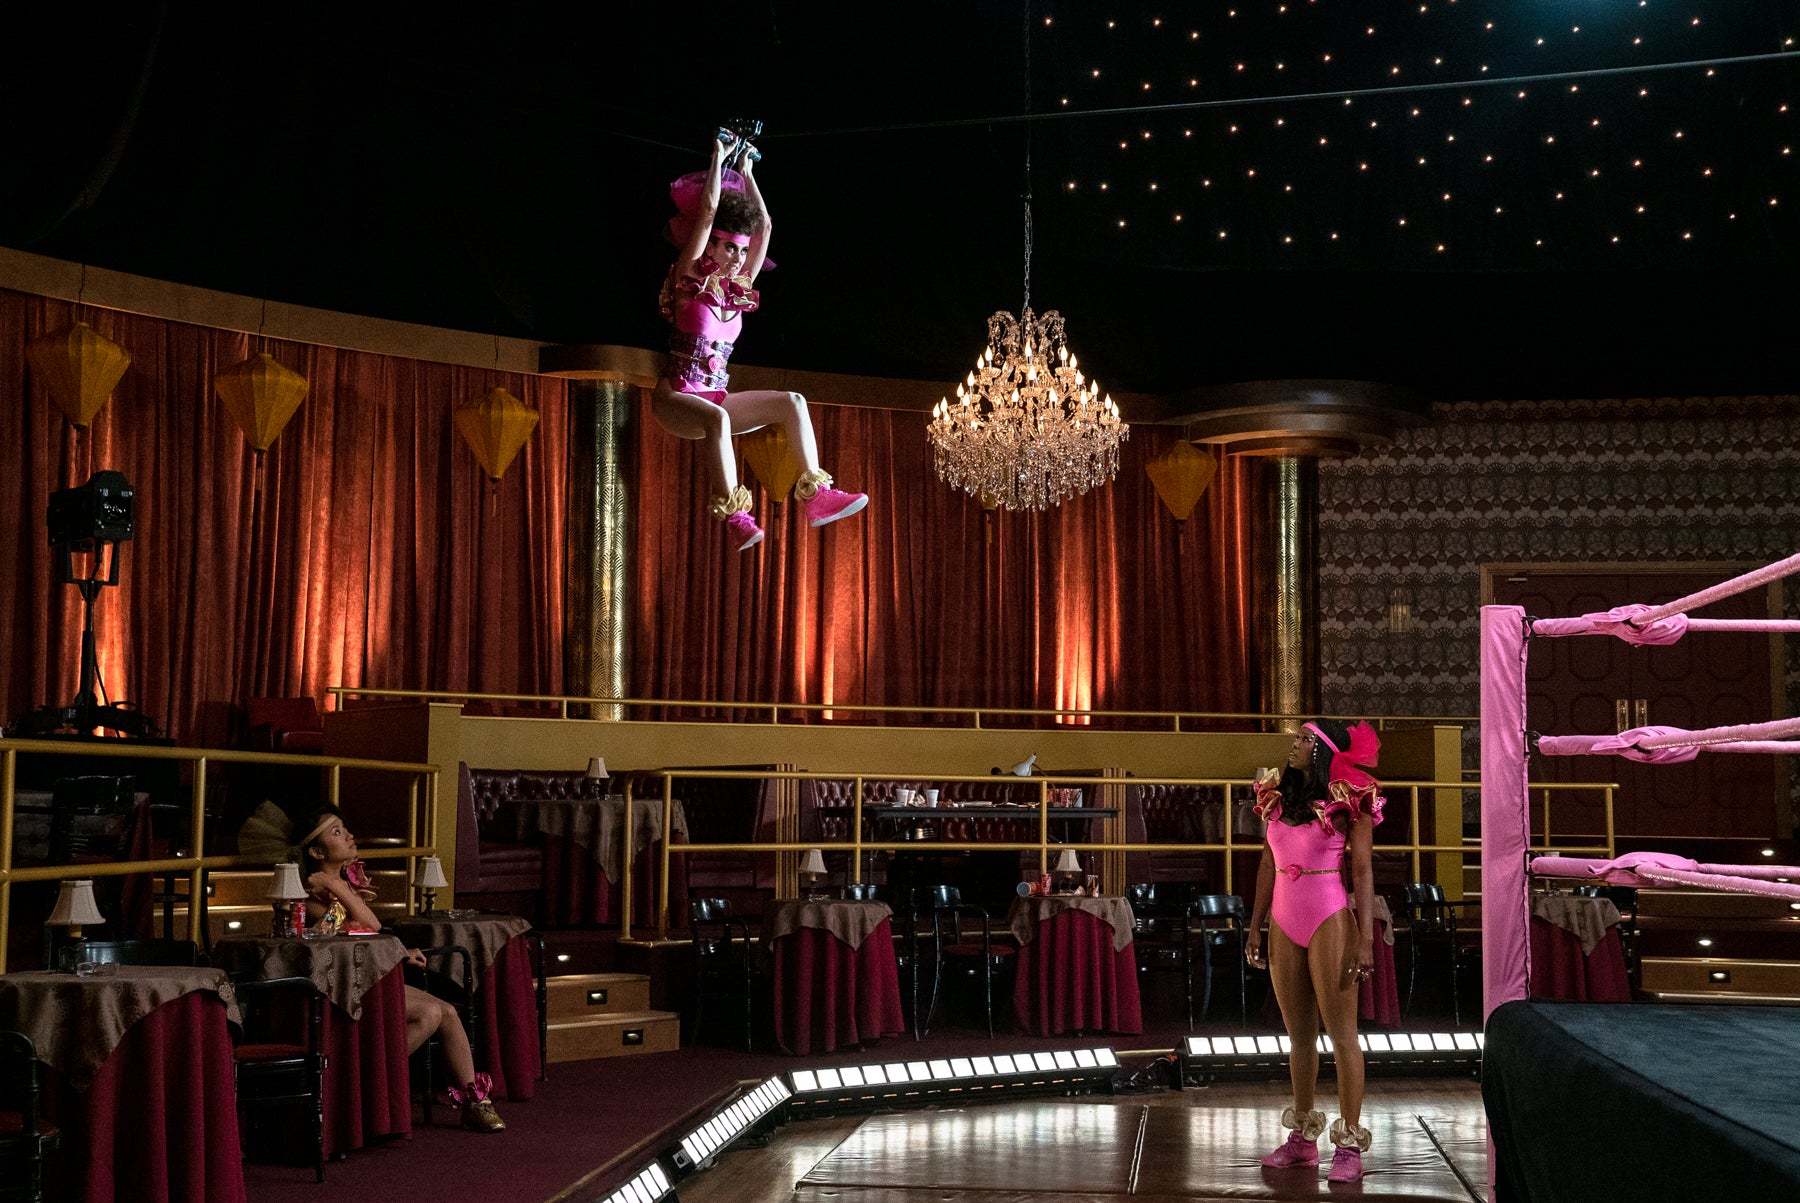 Zoya the Destroya zip lines into the ring wearing a pink and gold costume during rehearsals for GLOW. 